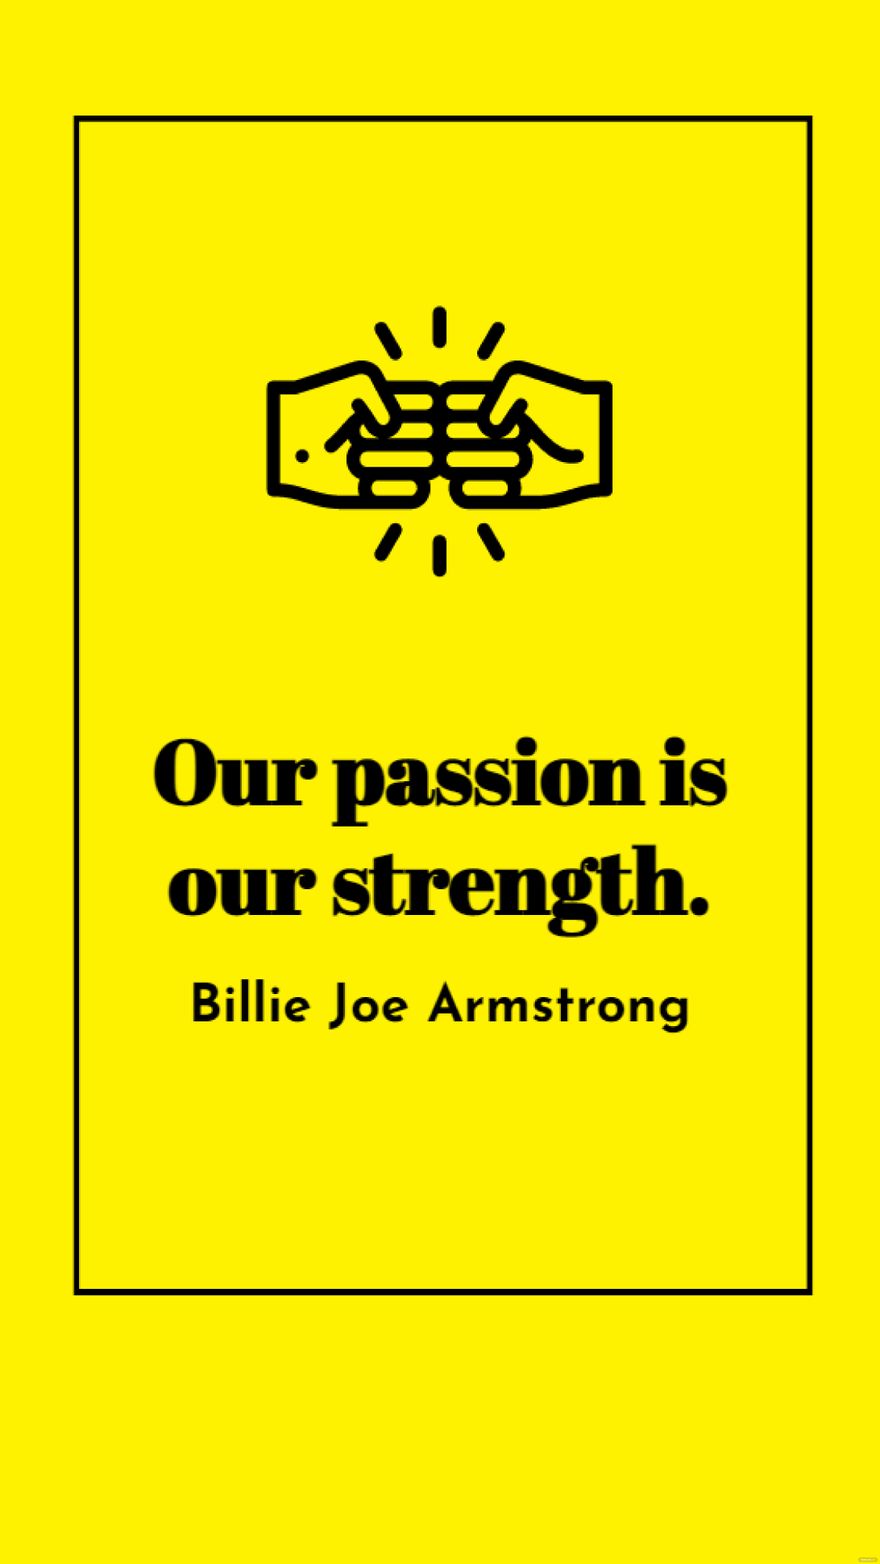 Free Billie Joe Armstrong - Our passion is our strength.  in JPG